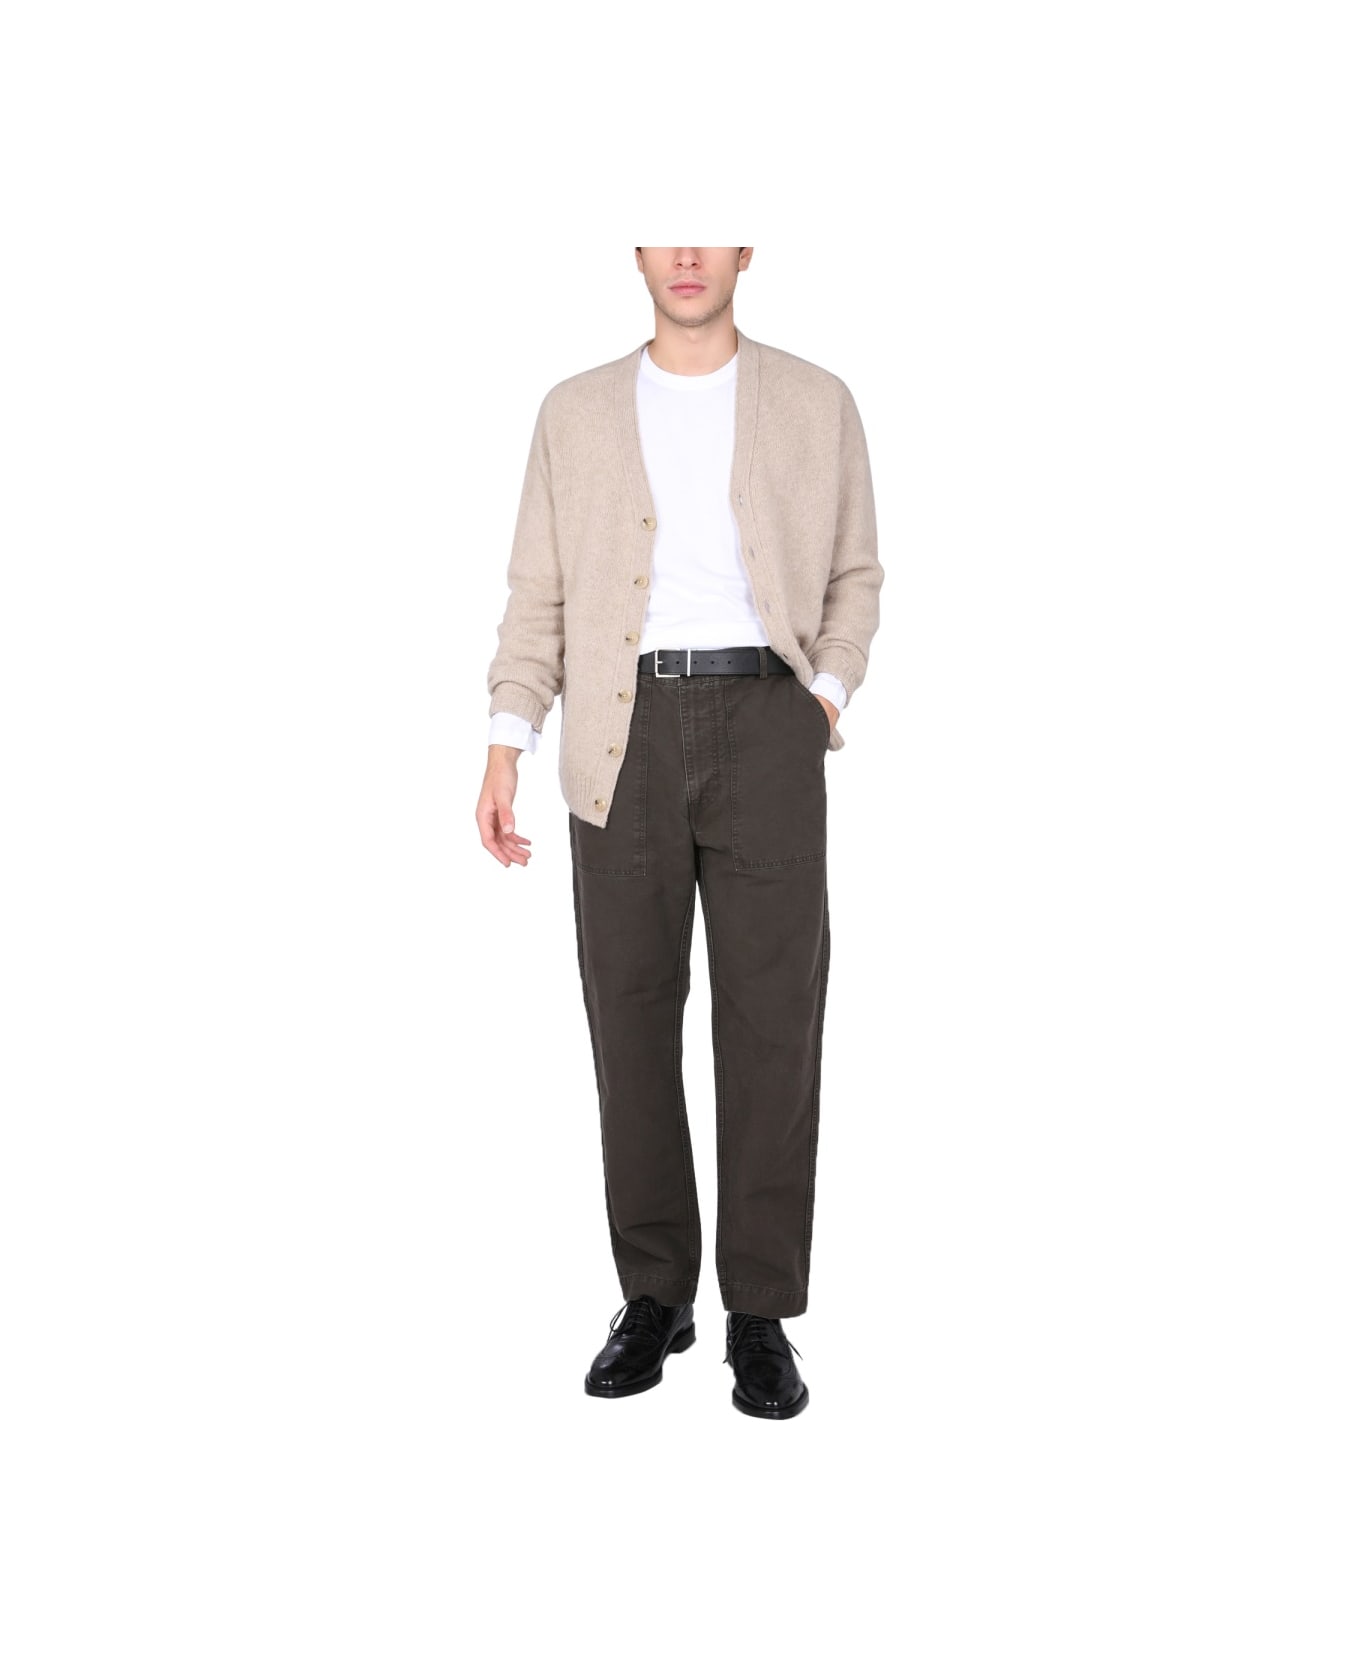 East Harbour Surplus "tommy" Trousers - BROWN ボトムス